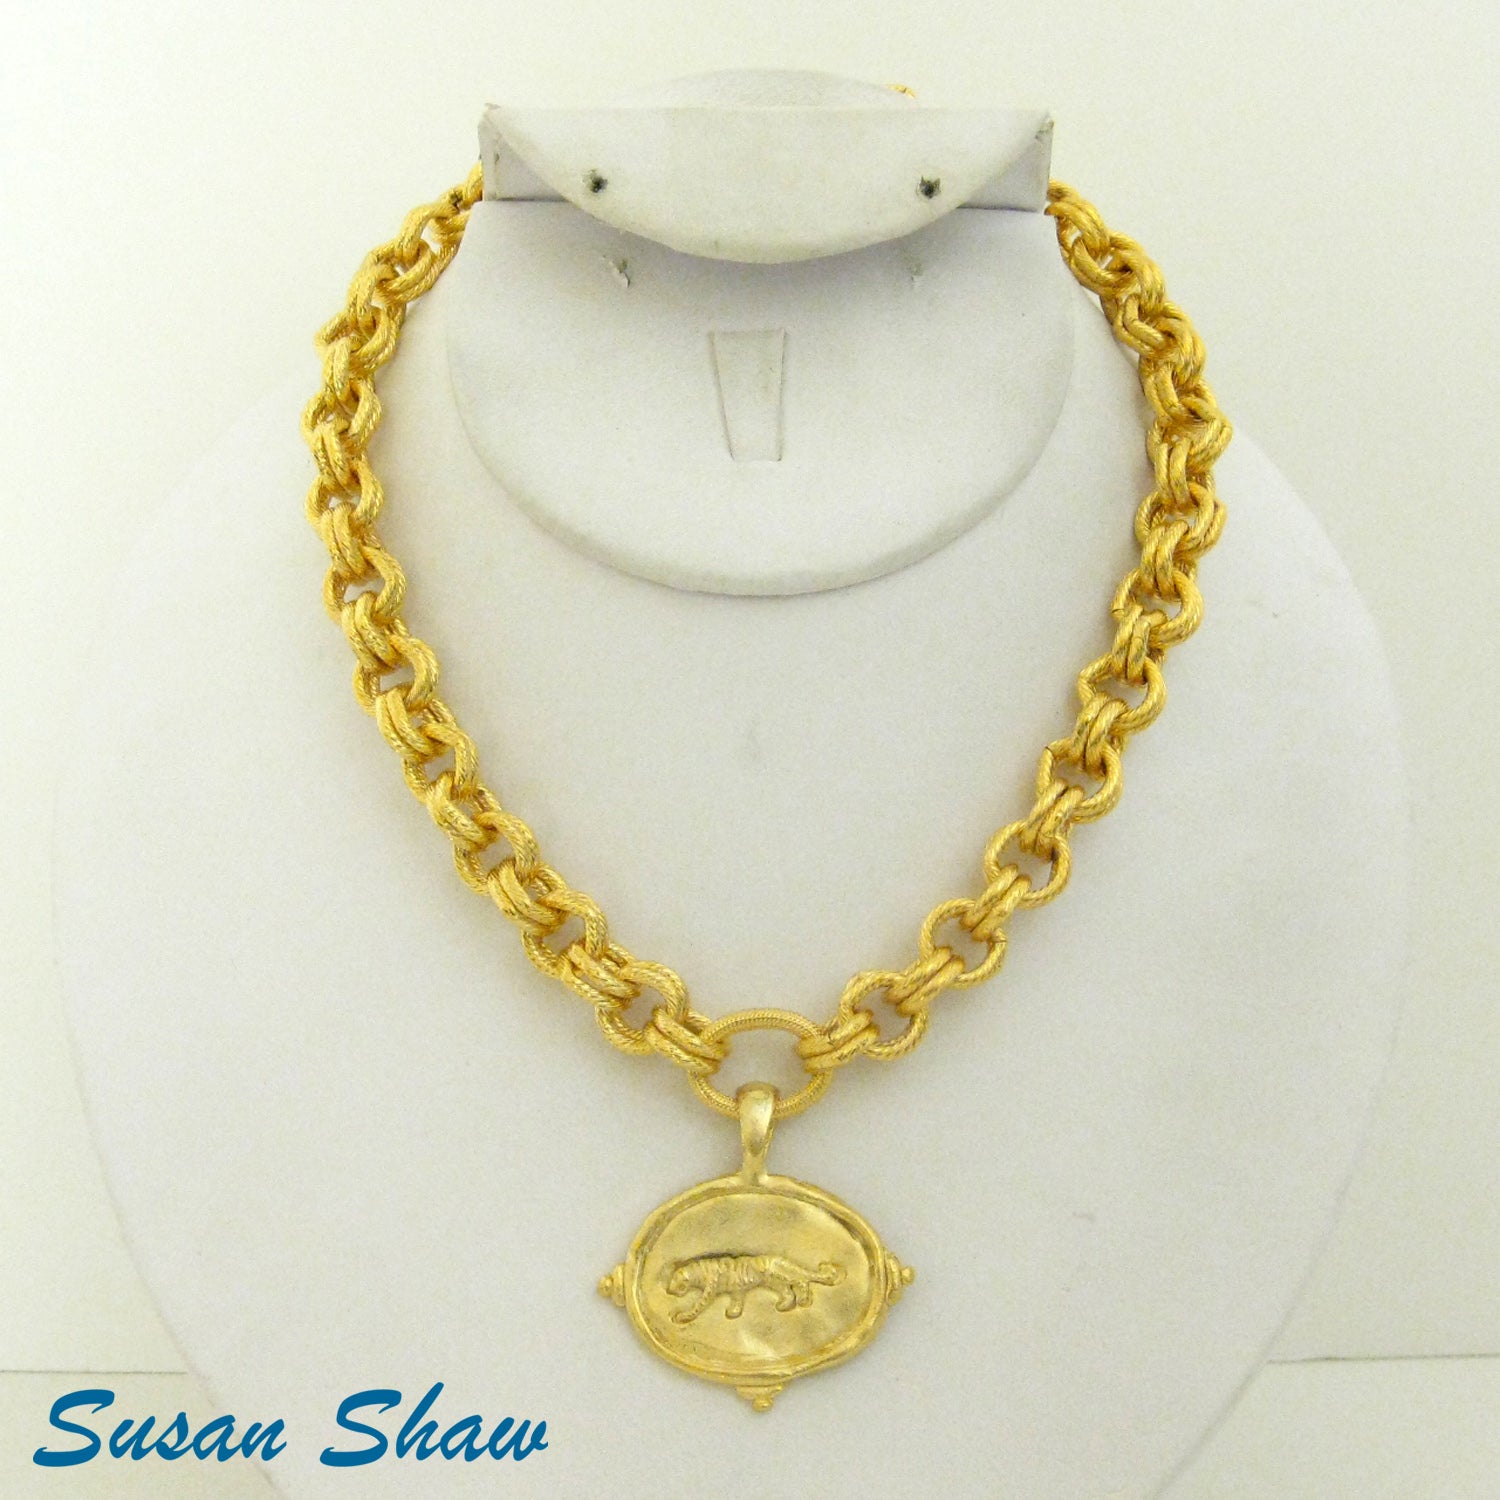 Susan Shaw Jewelry Tiger Necklace, Tiger Charm Pendant in Gold